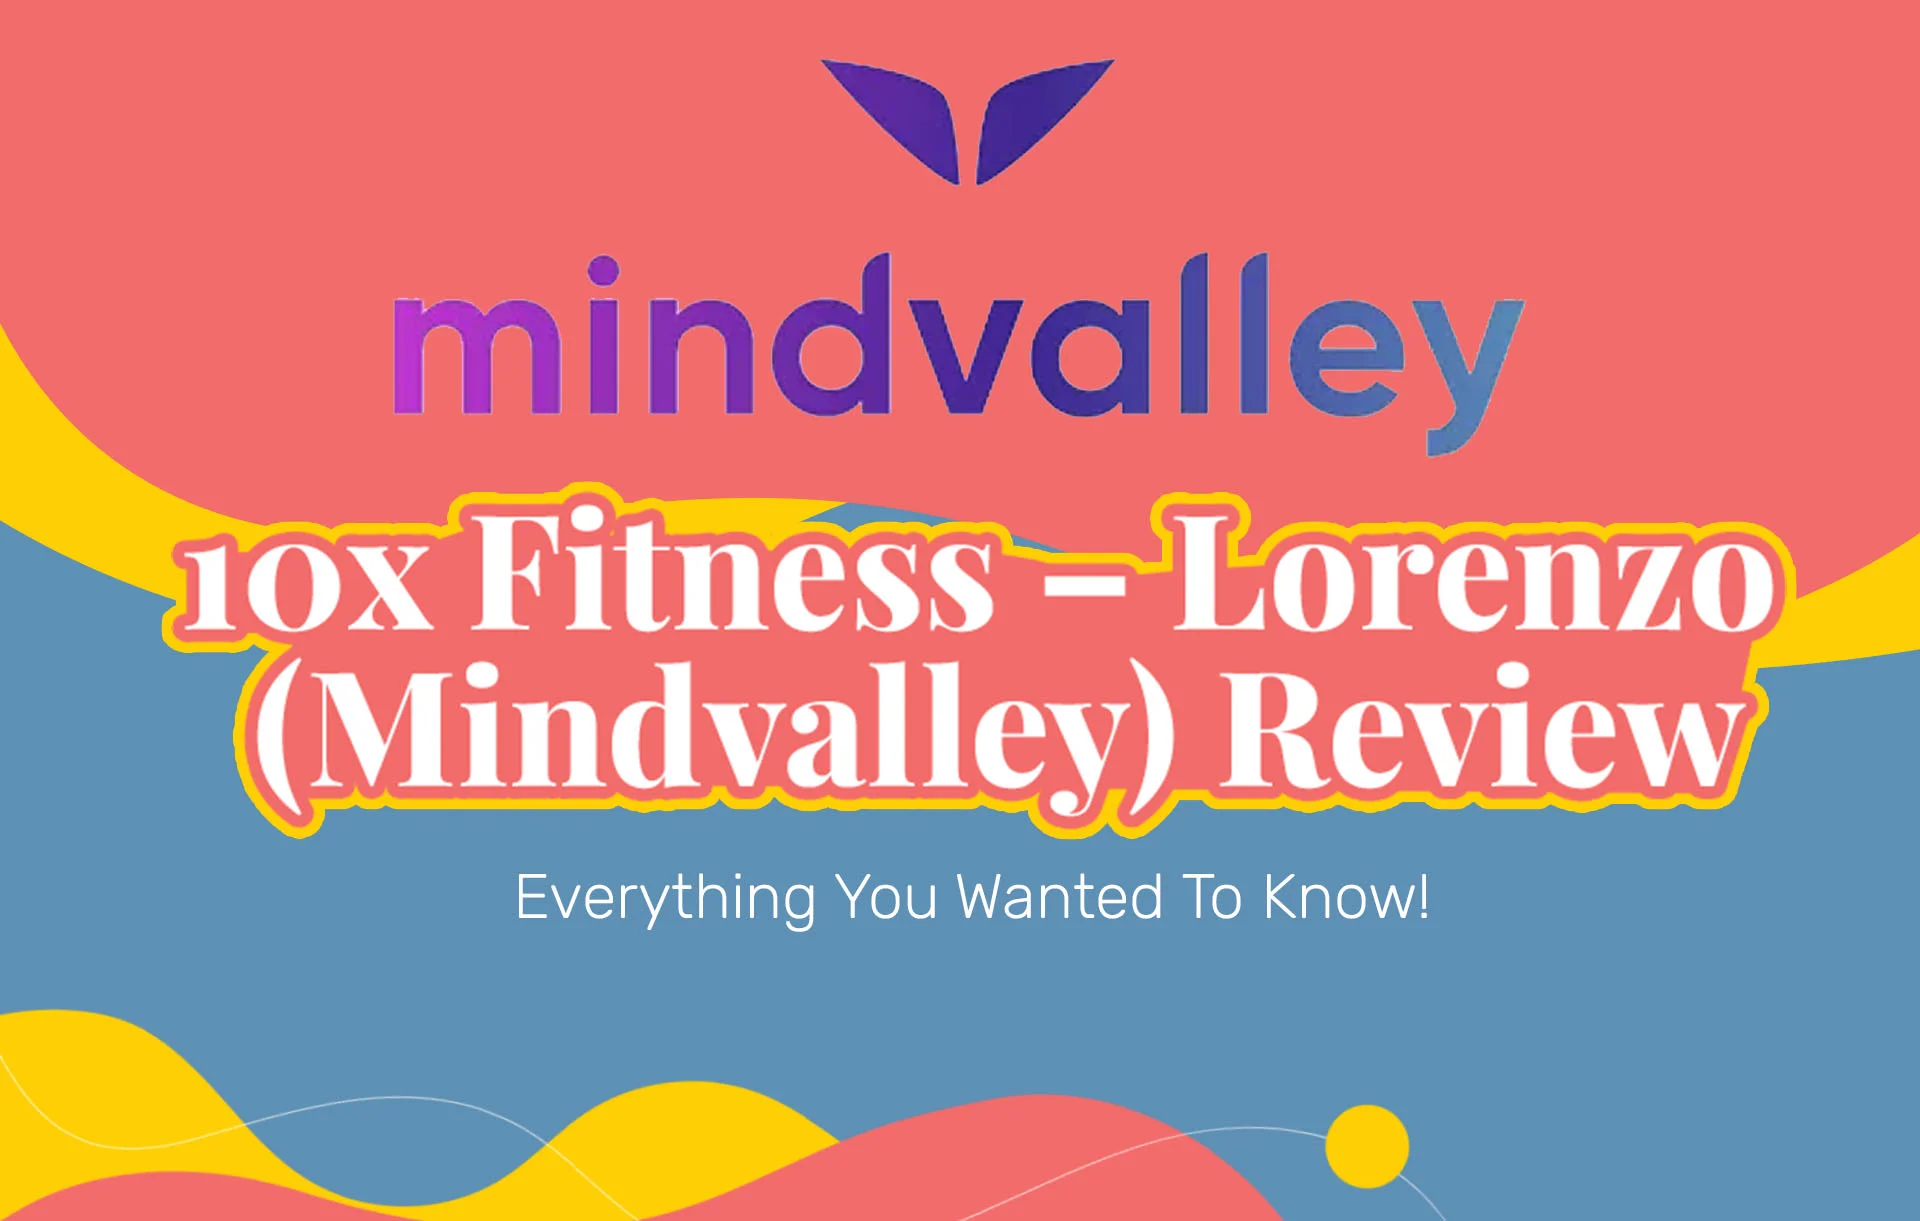 10x Fitness Reviews: Best Business Course?